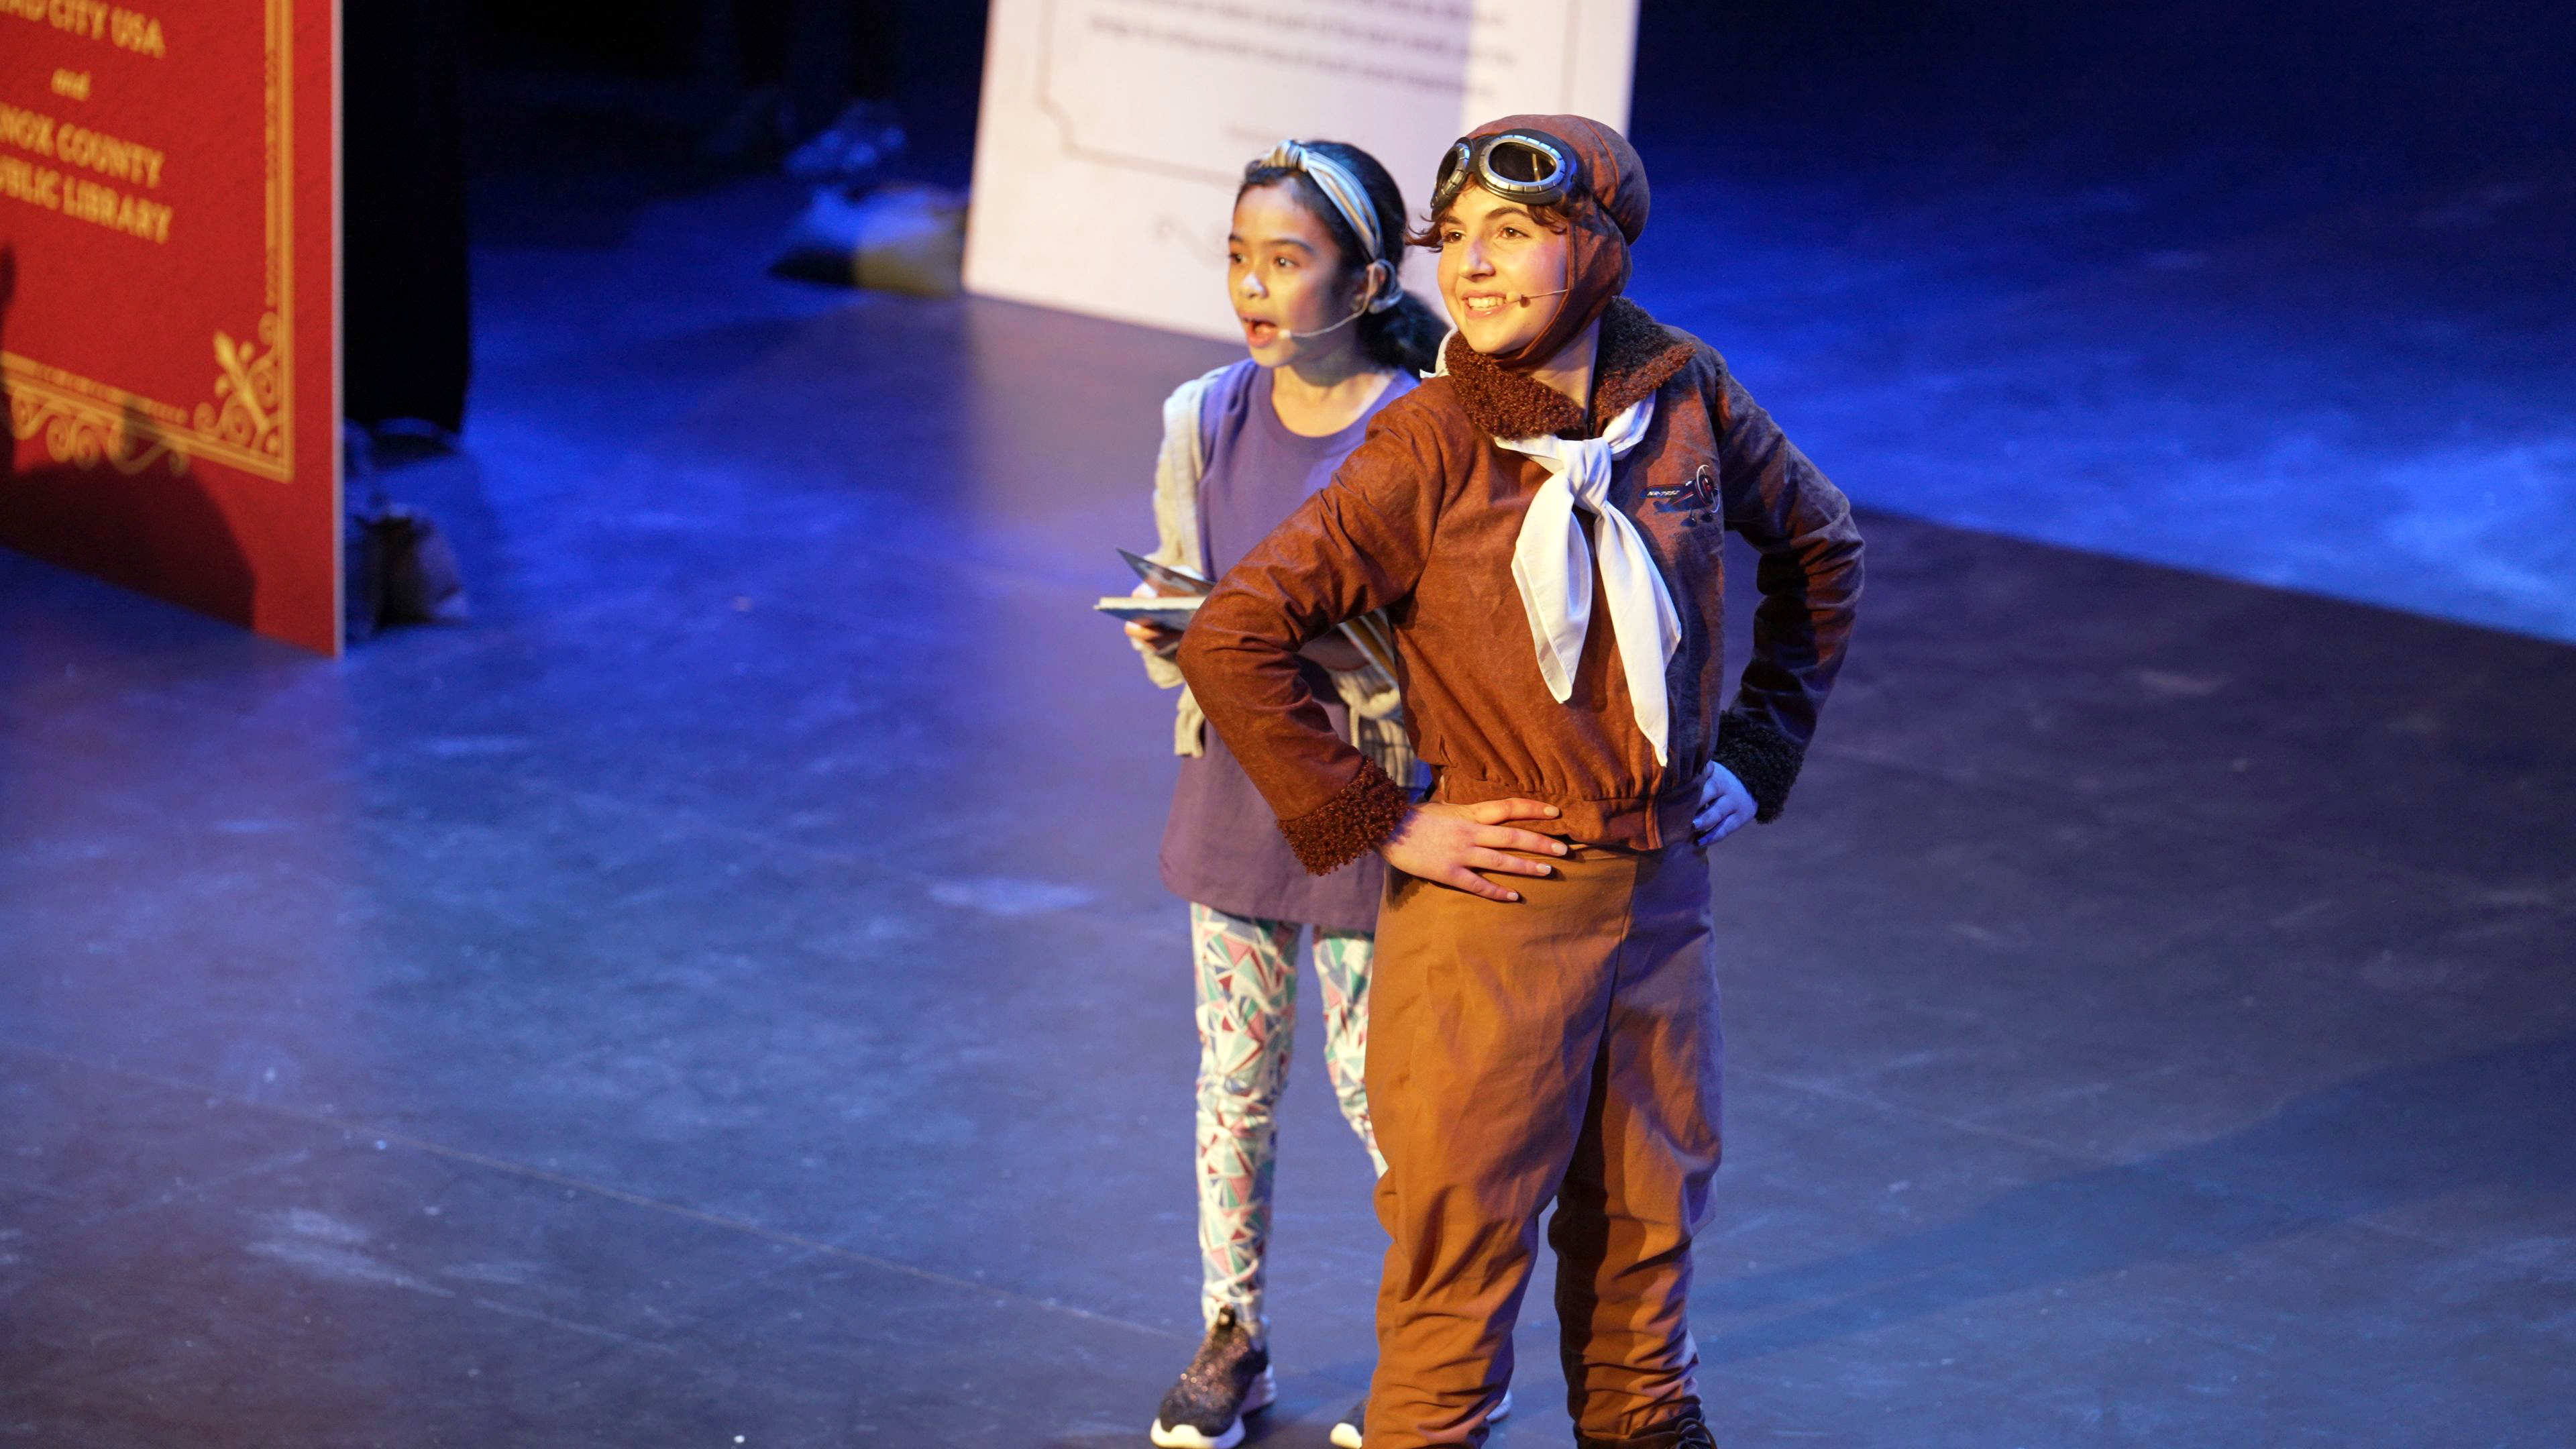 young woman dressed as Amelia Earhart in aviator hat, goggles, scarf, pilot jacket, riding pants